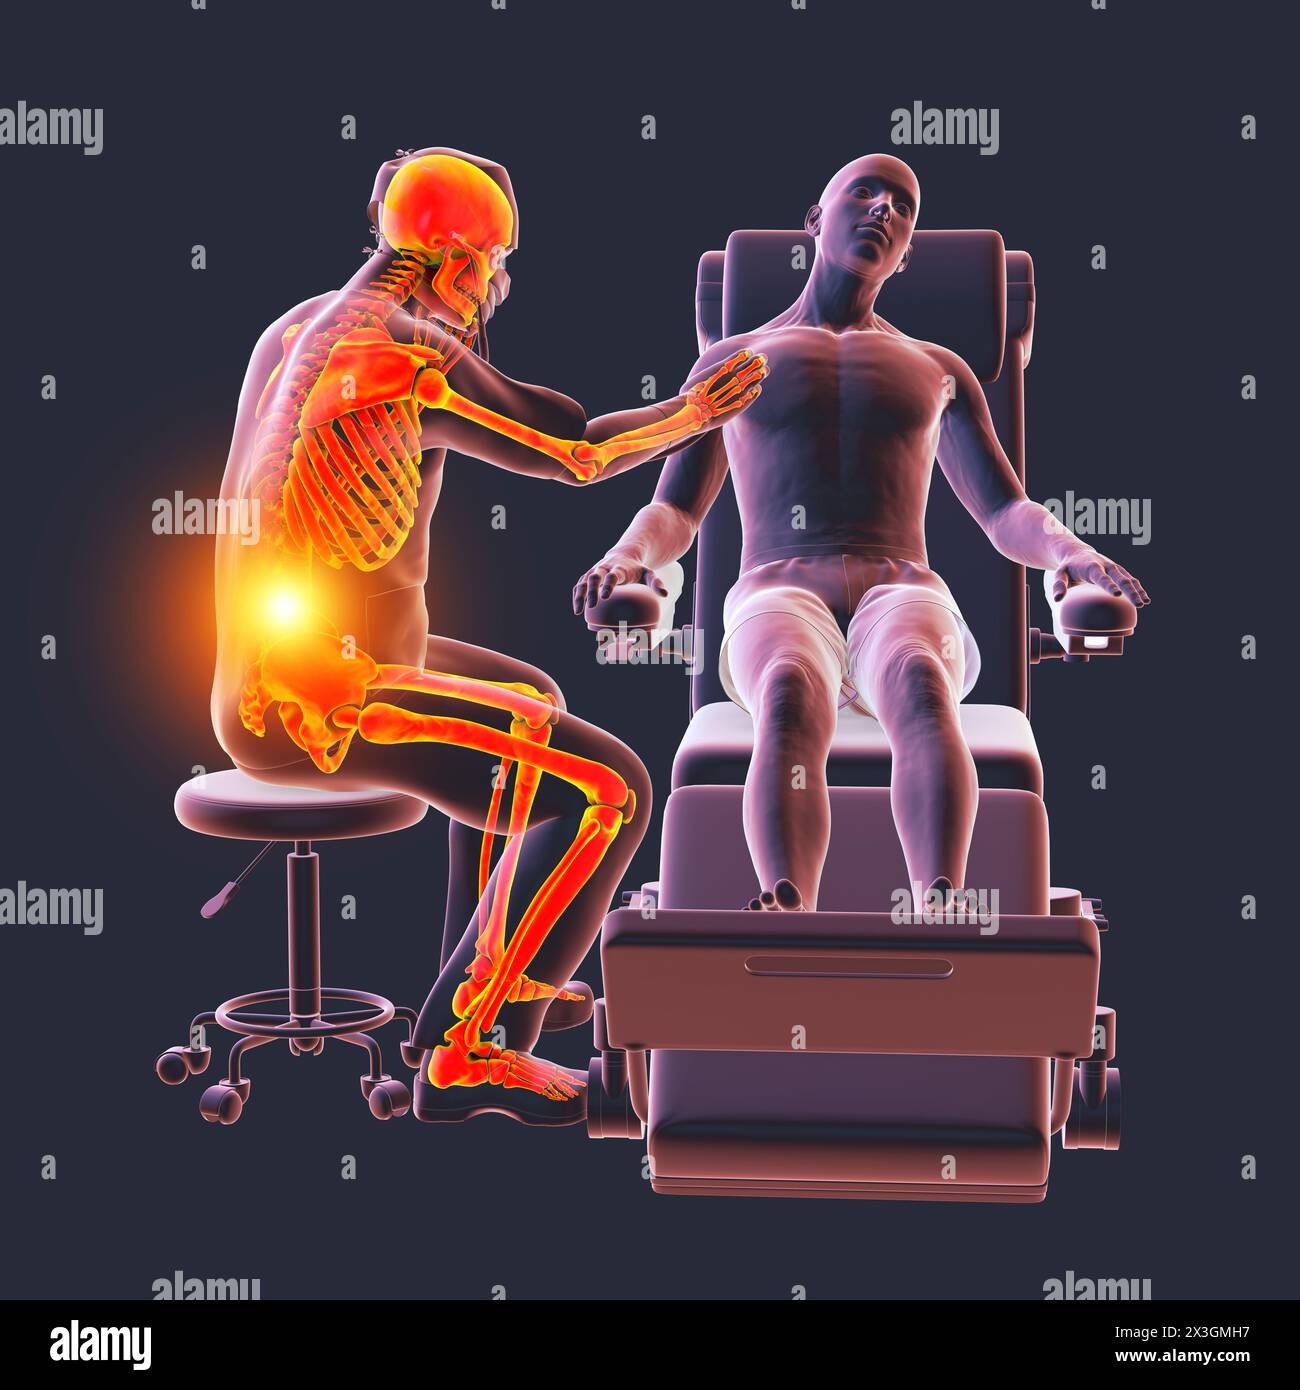 Illustration symbolising occupational hazards in healthcare, featuring a healthcare worker experiencing back pain. Stock Photo